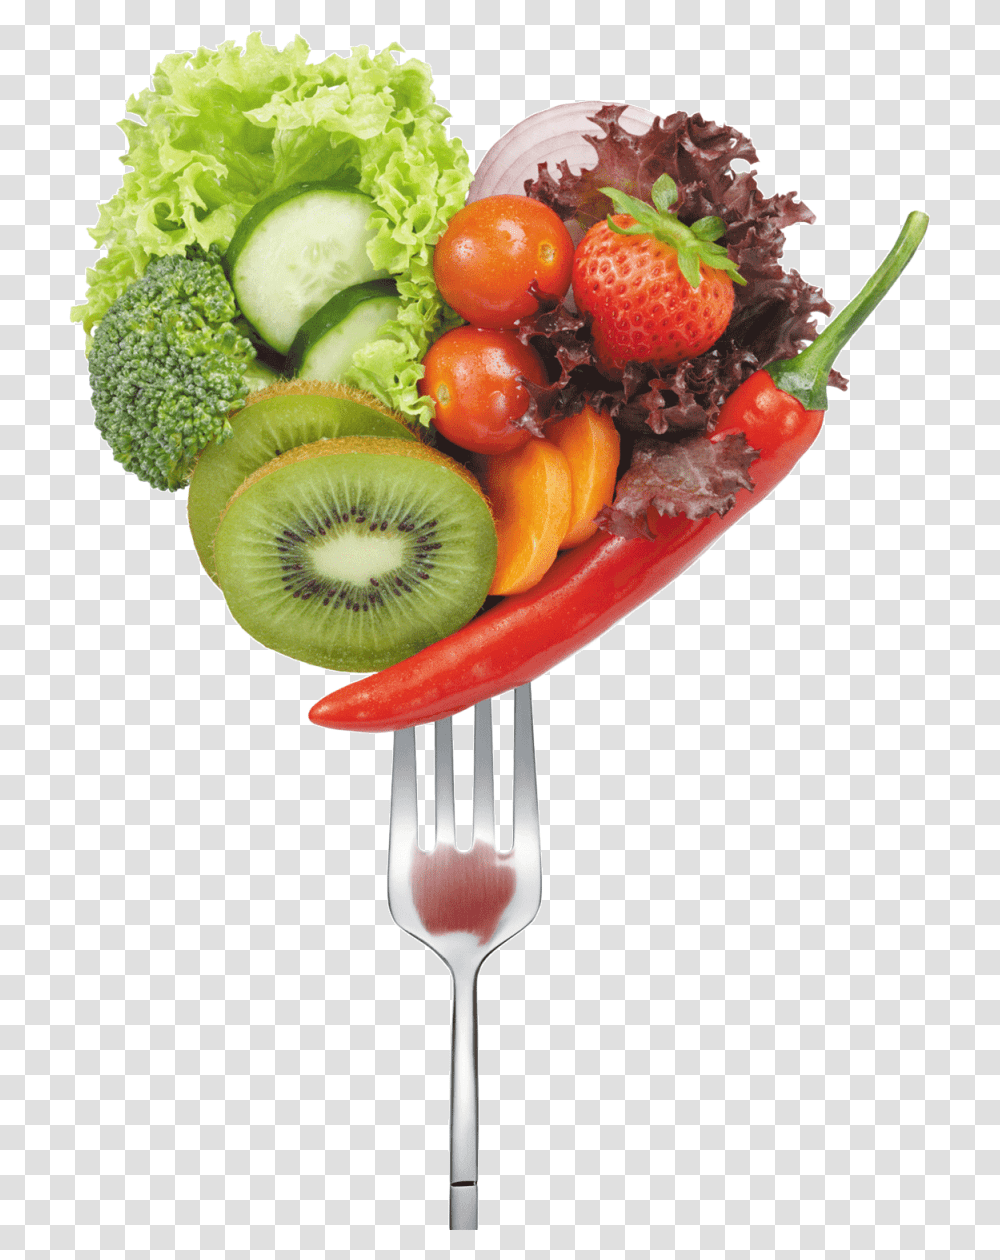 Fruits And Vegetables Healthy Food Background, Plant, Fork, Cutlery, Strawberry Transparent Png